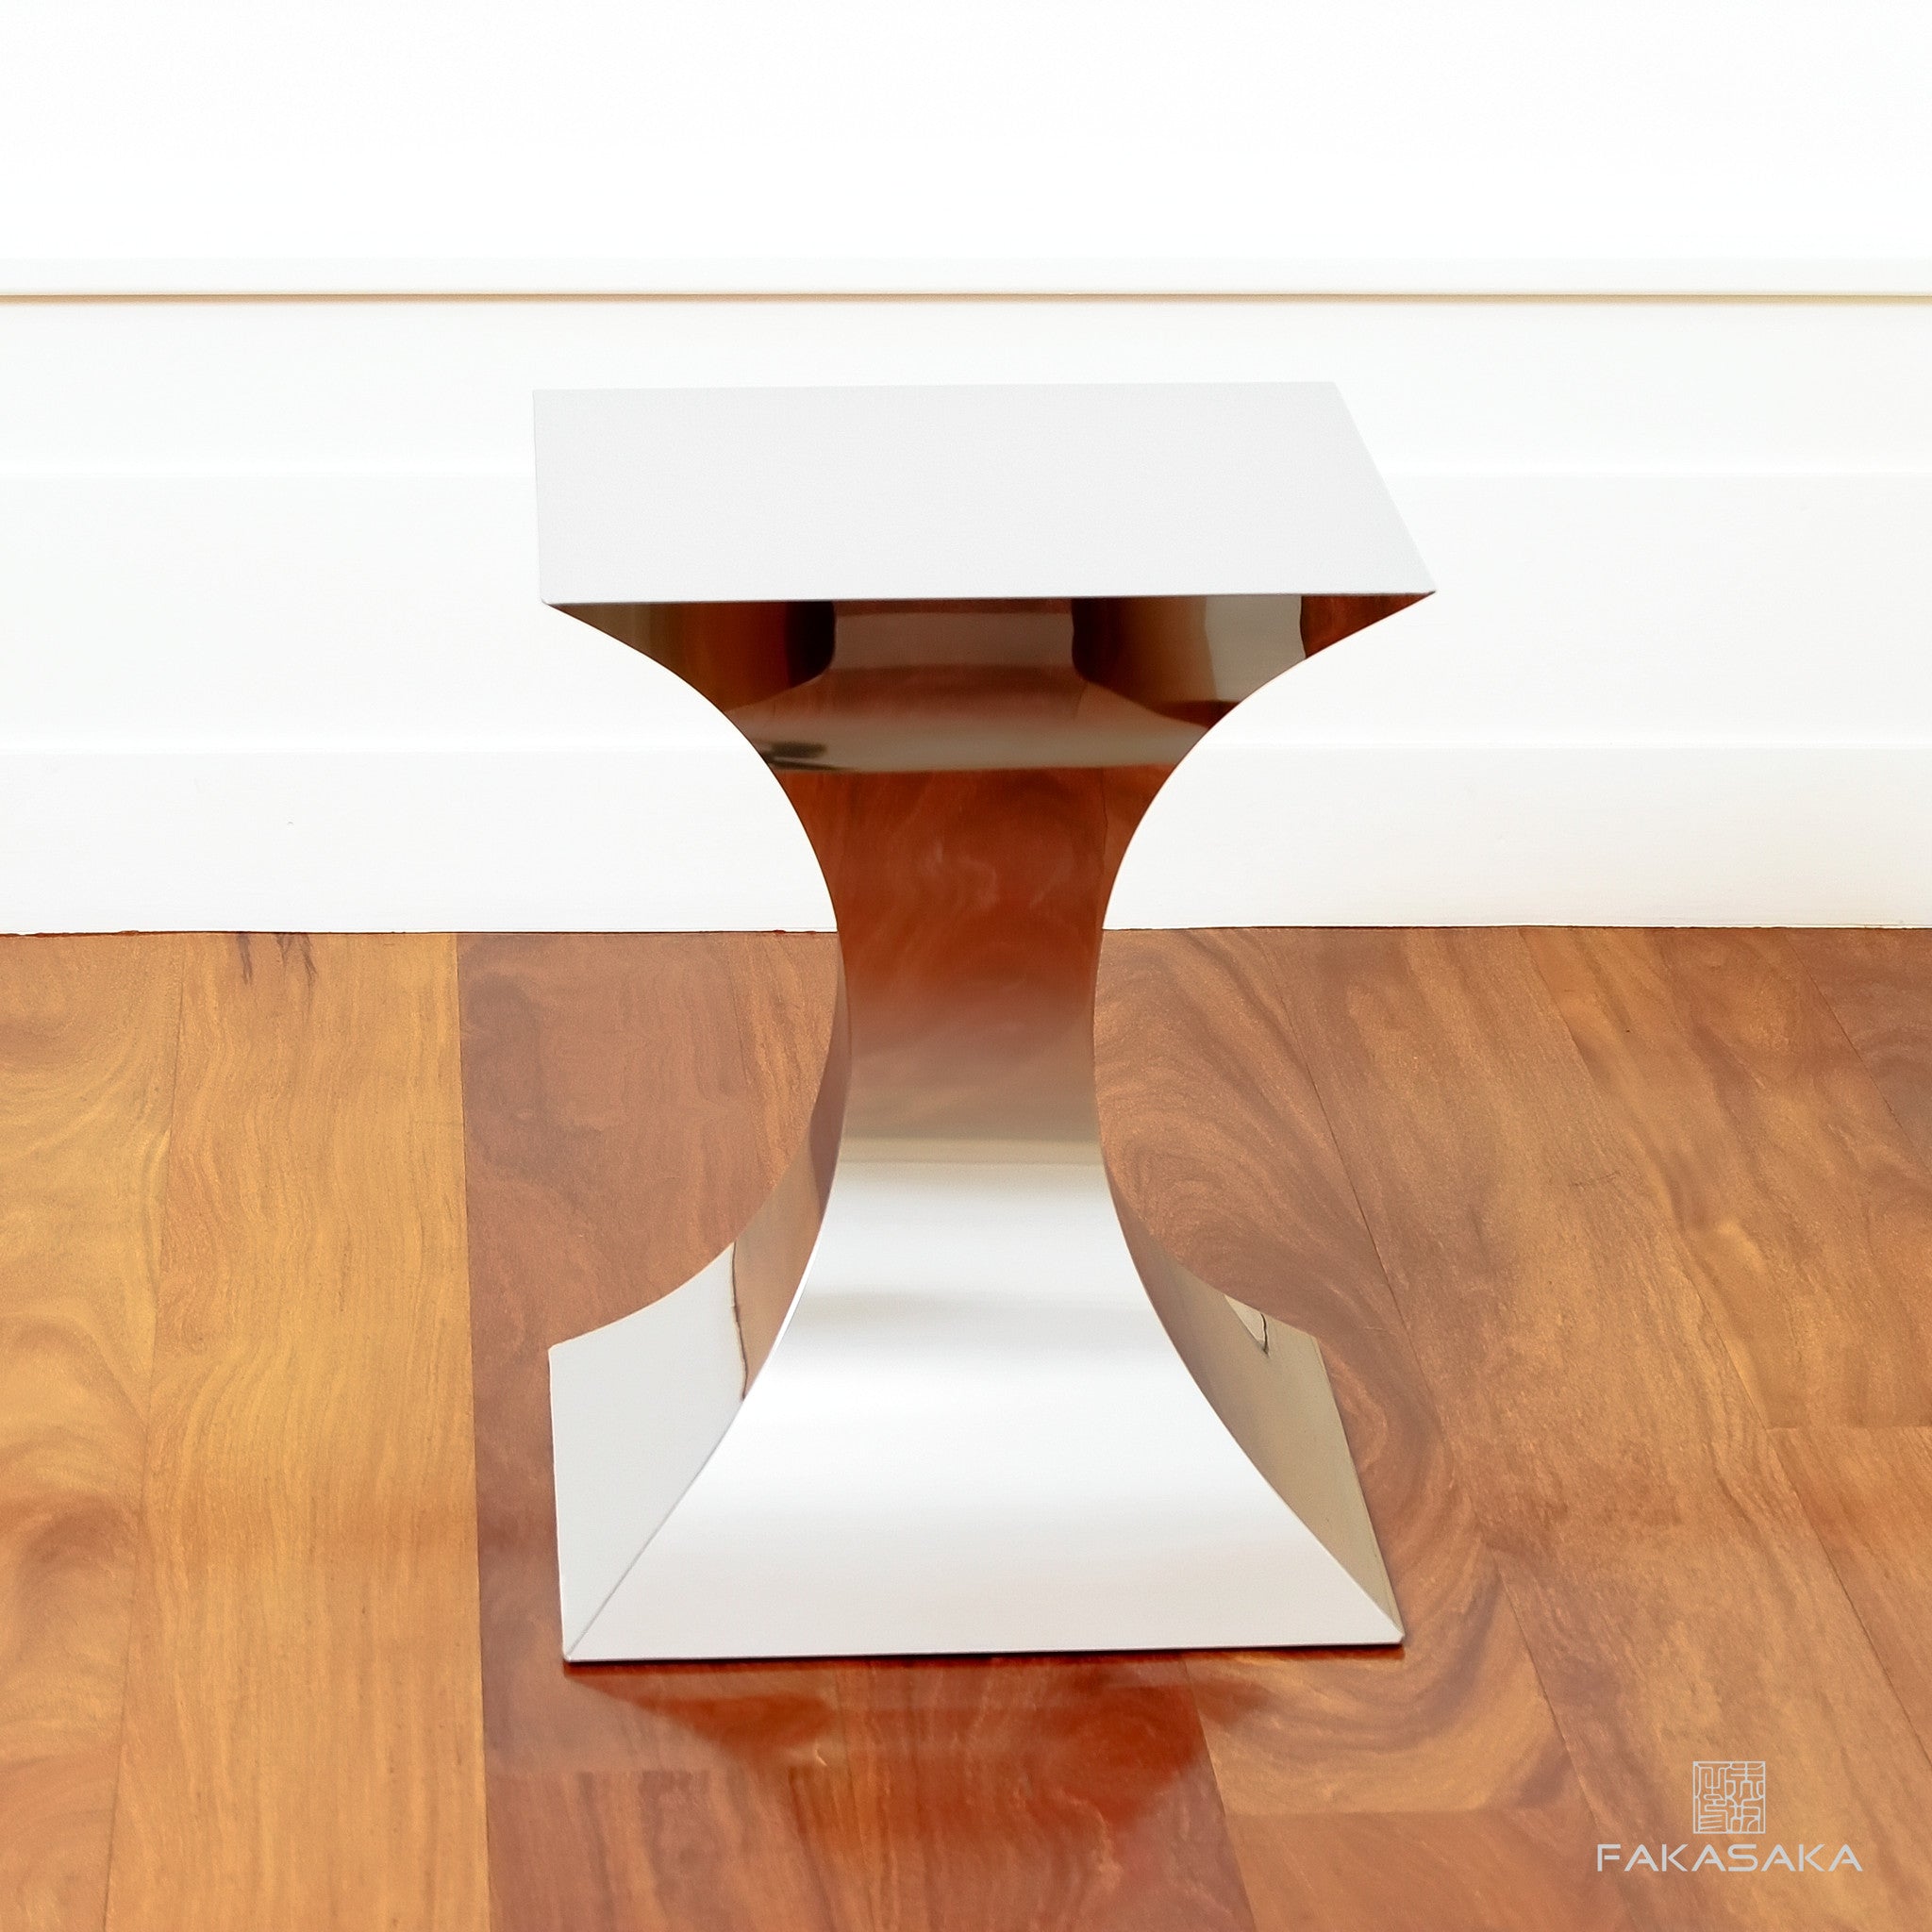 FA7<br><br>STOOL / SIDE TABLE  / DRINK TABLE<br><br>STAINLESS STEEL